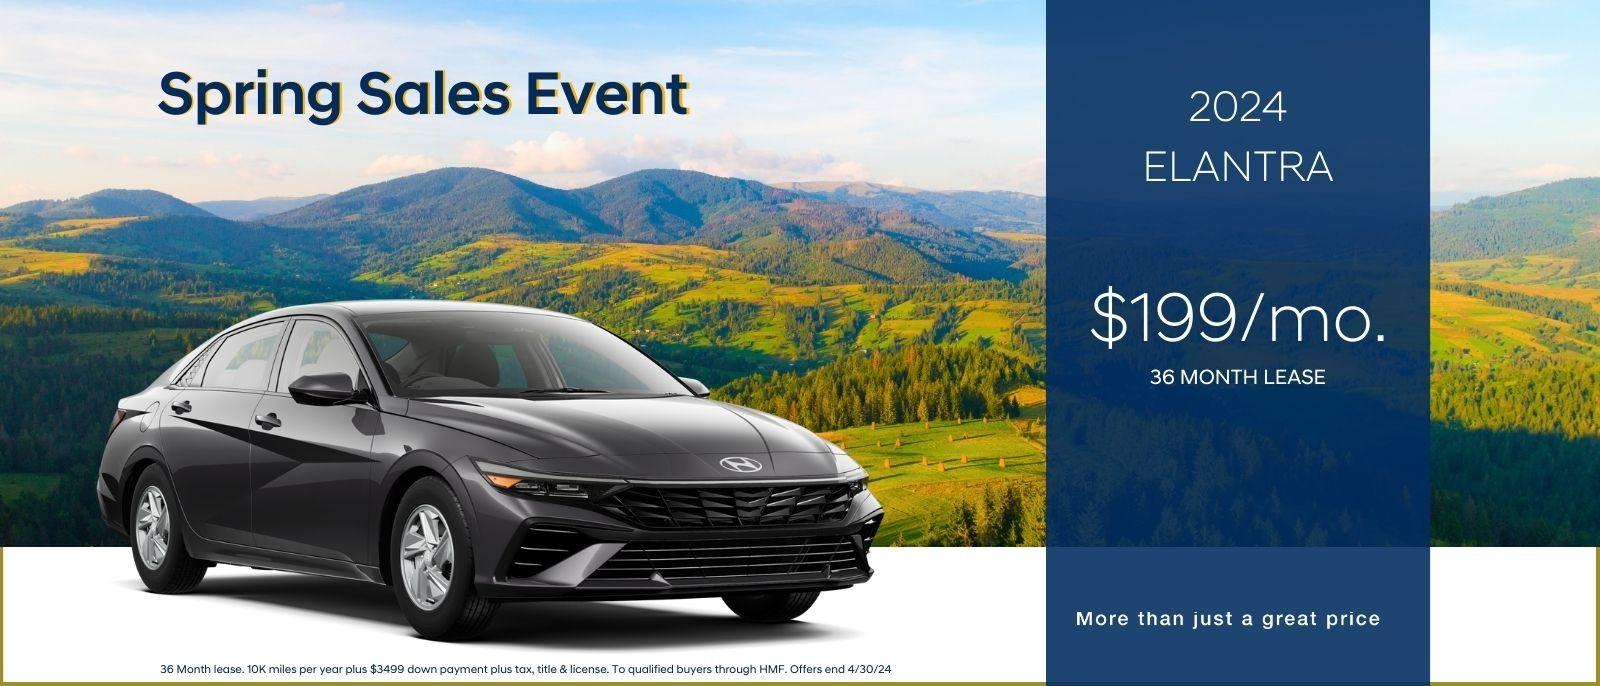 Spring Sales Event 

2024 Elantra
$199/mo
36 month lease 

More than just a great price